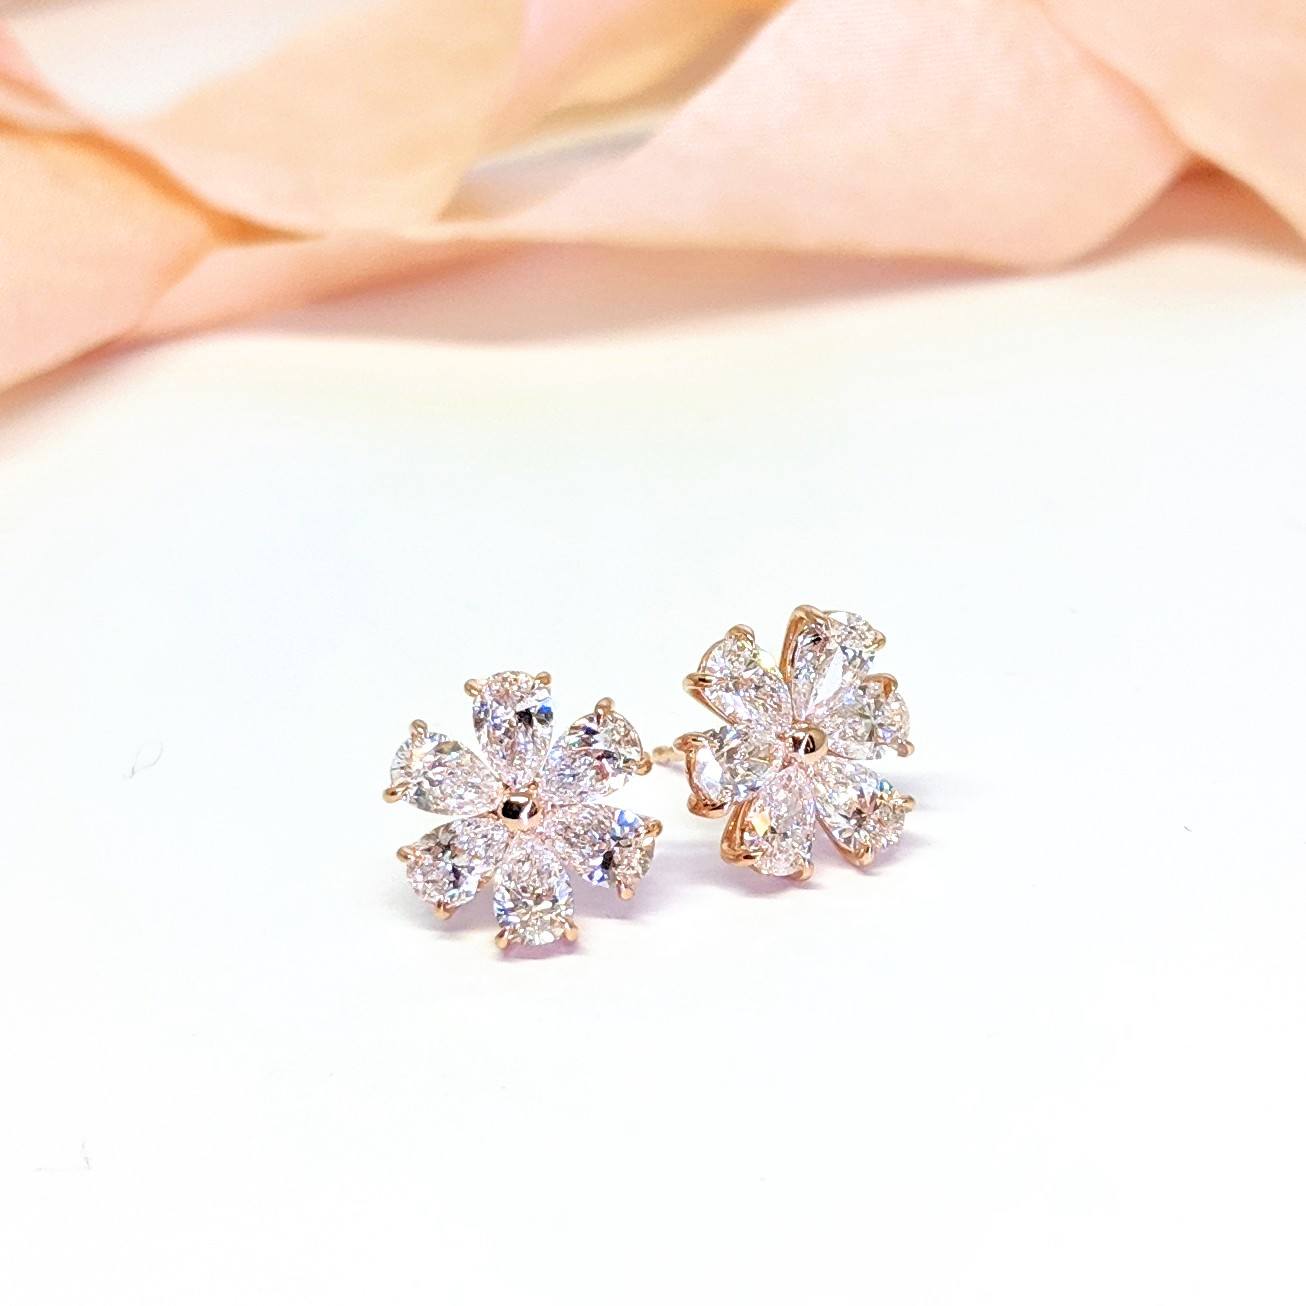 rose gold and diamond earrings